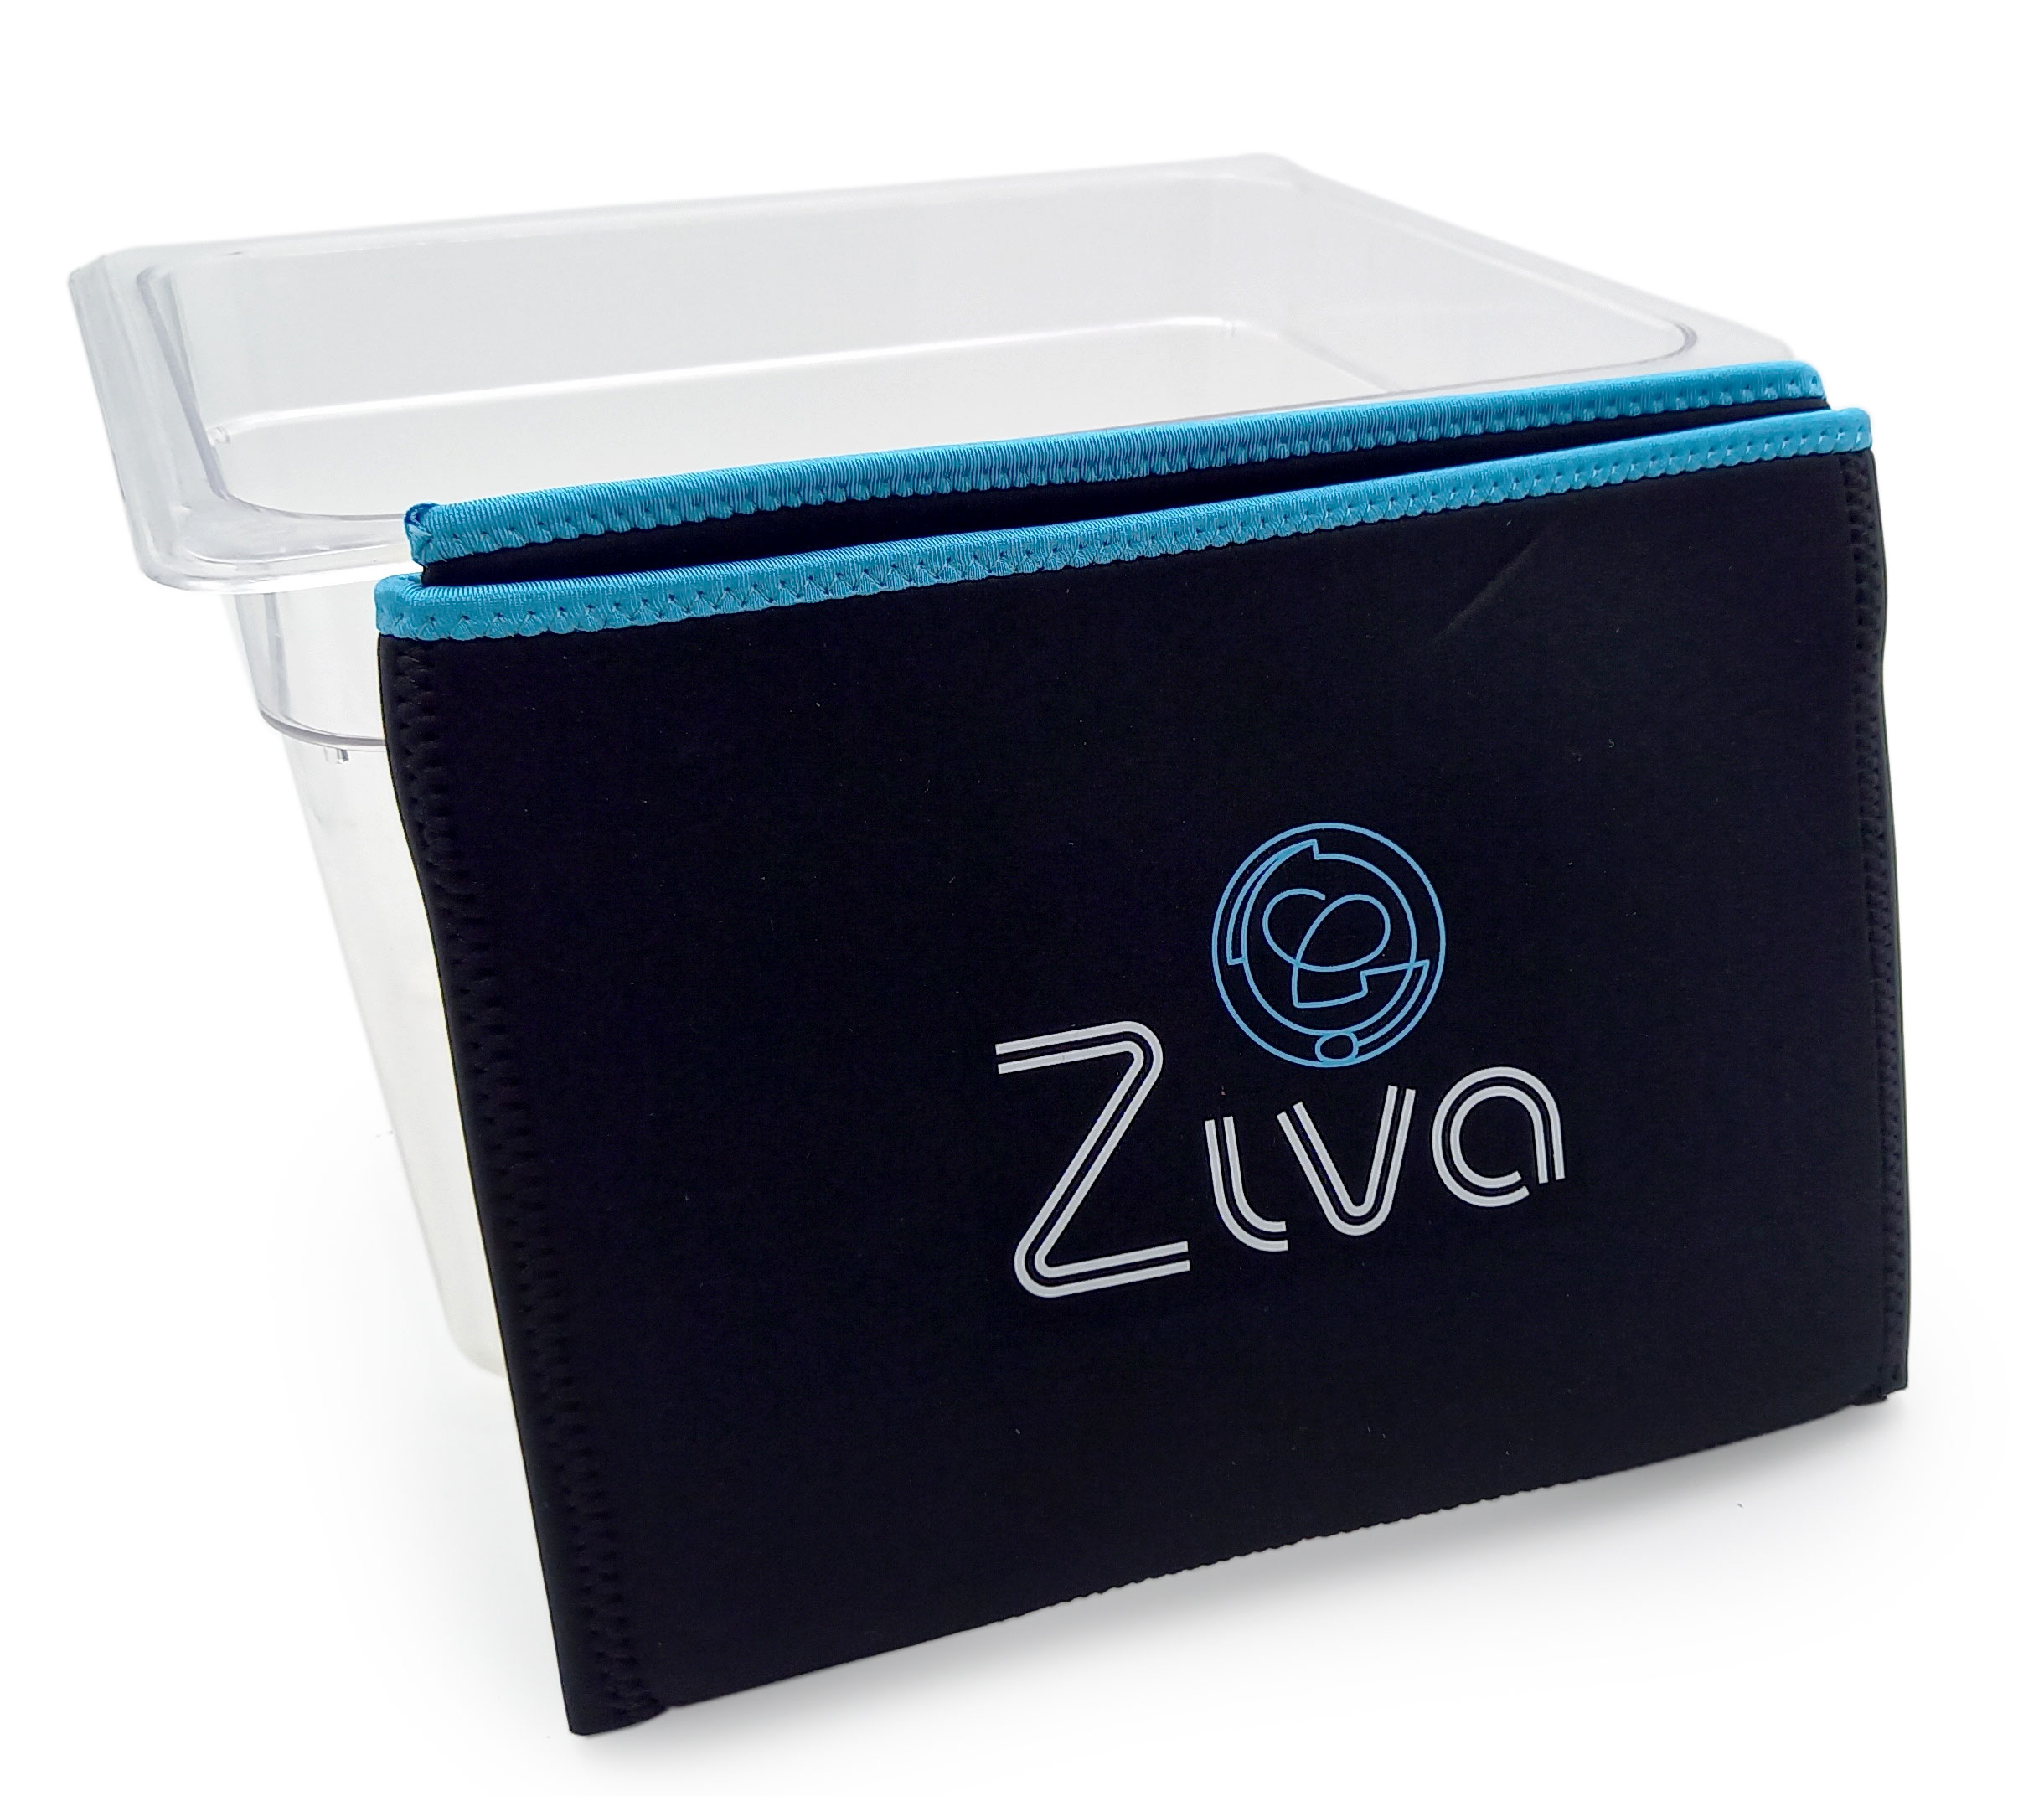 Ziva energy-saving insulation sleeve (sleeve) for 12 liter water container GN1 / 2